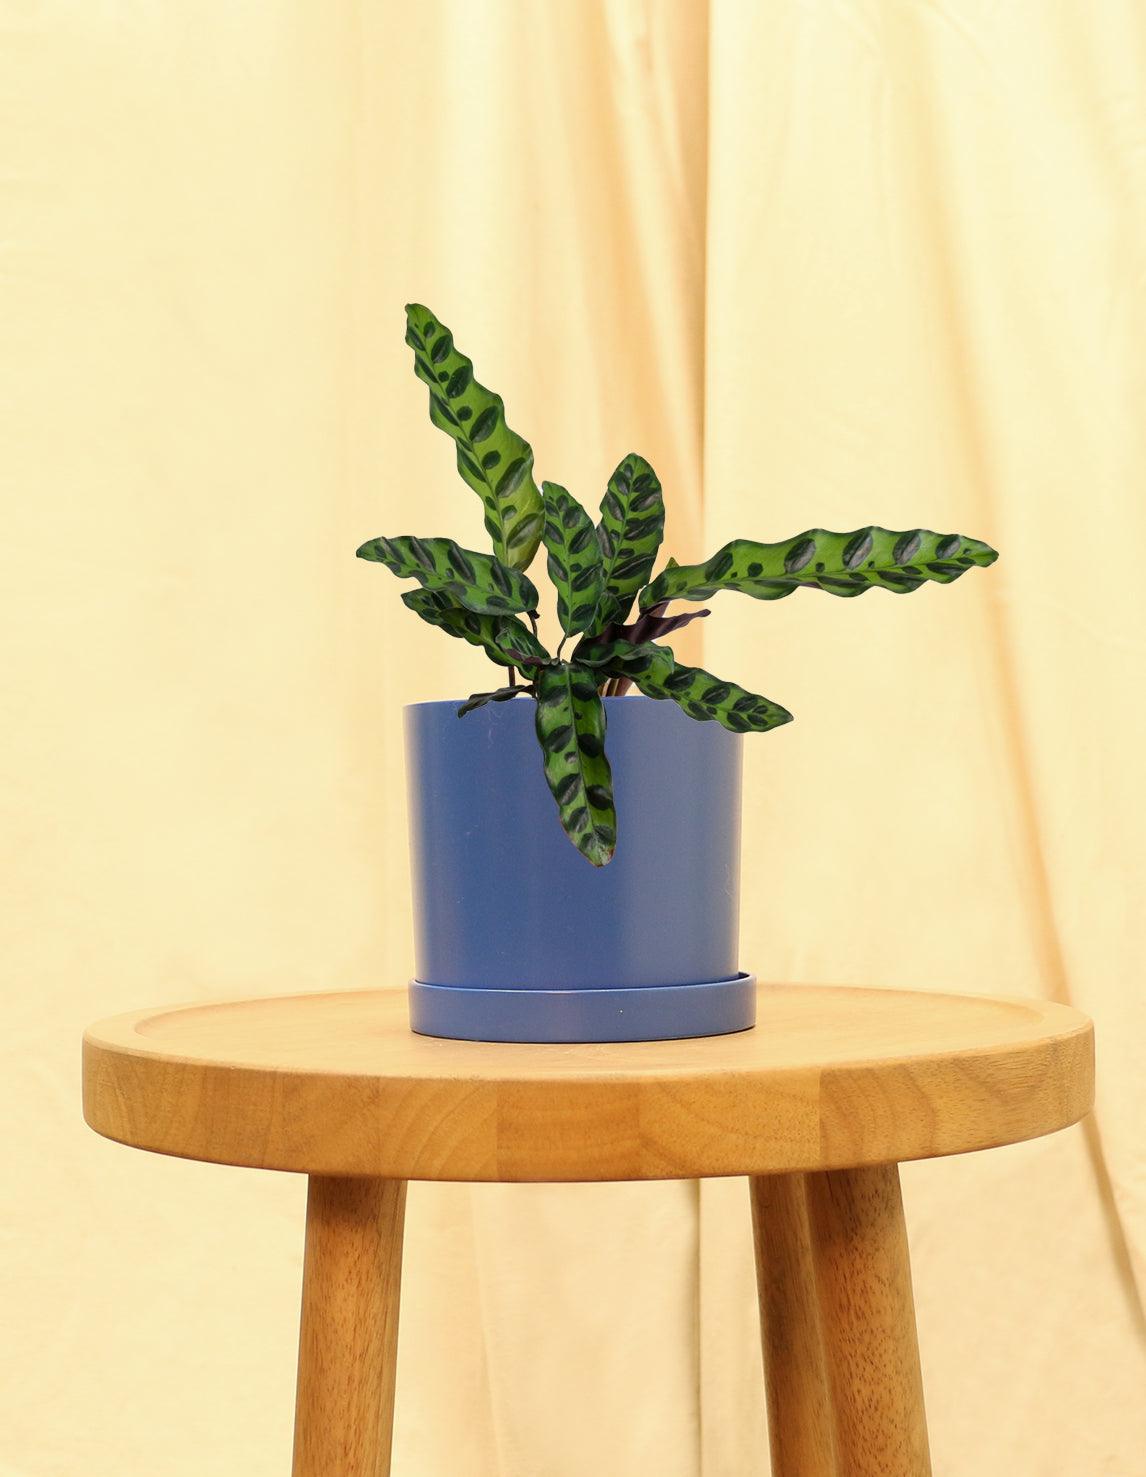 Small Rattle Snake Plant in blue pot.